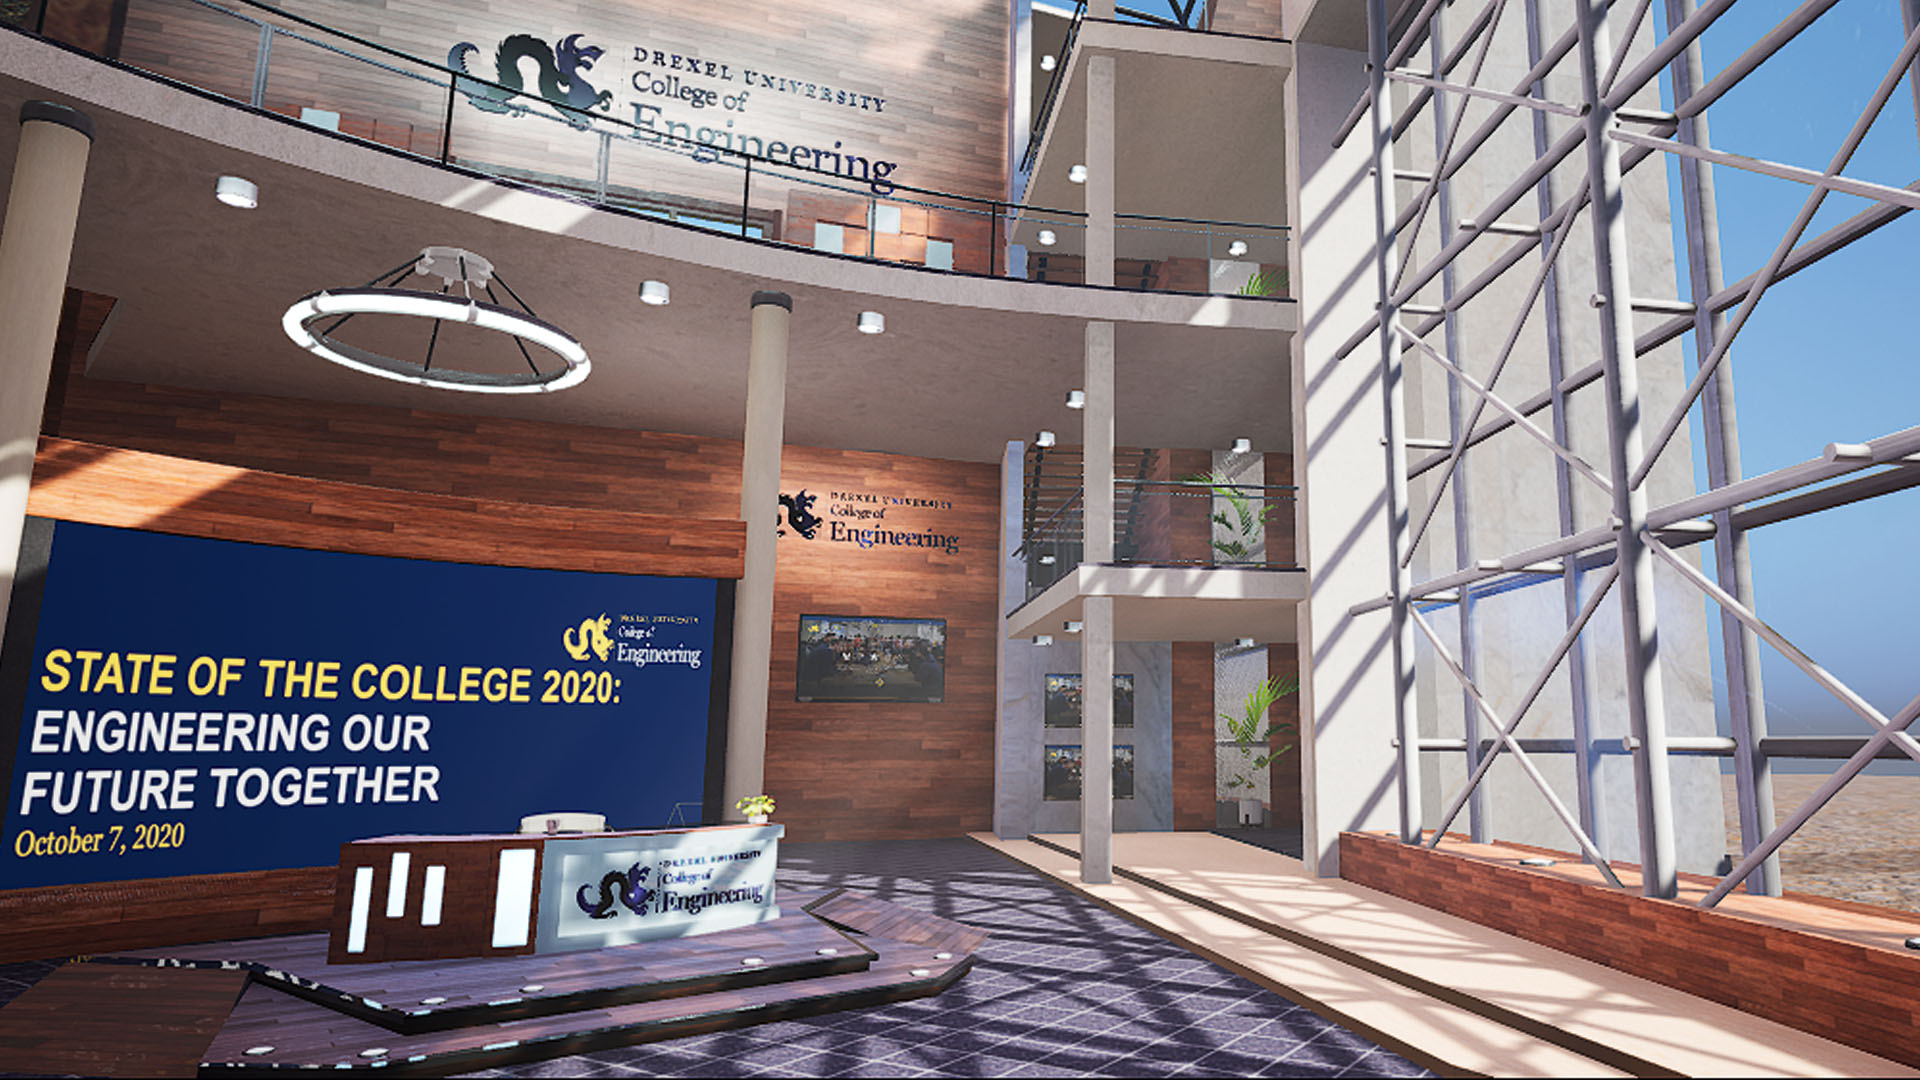 A virtual recreation of a building lobby, with a desk and windows.